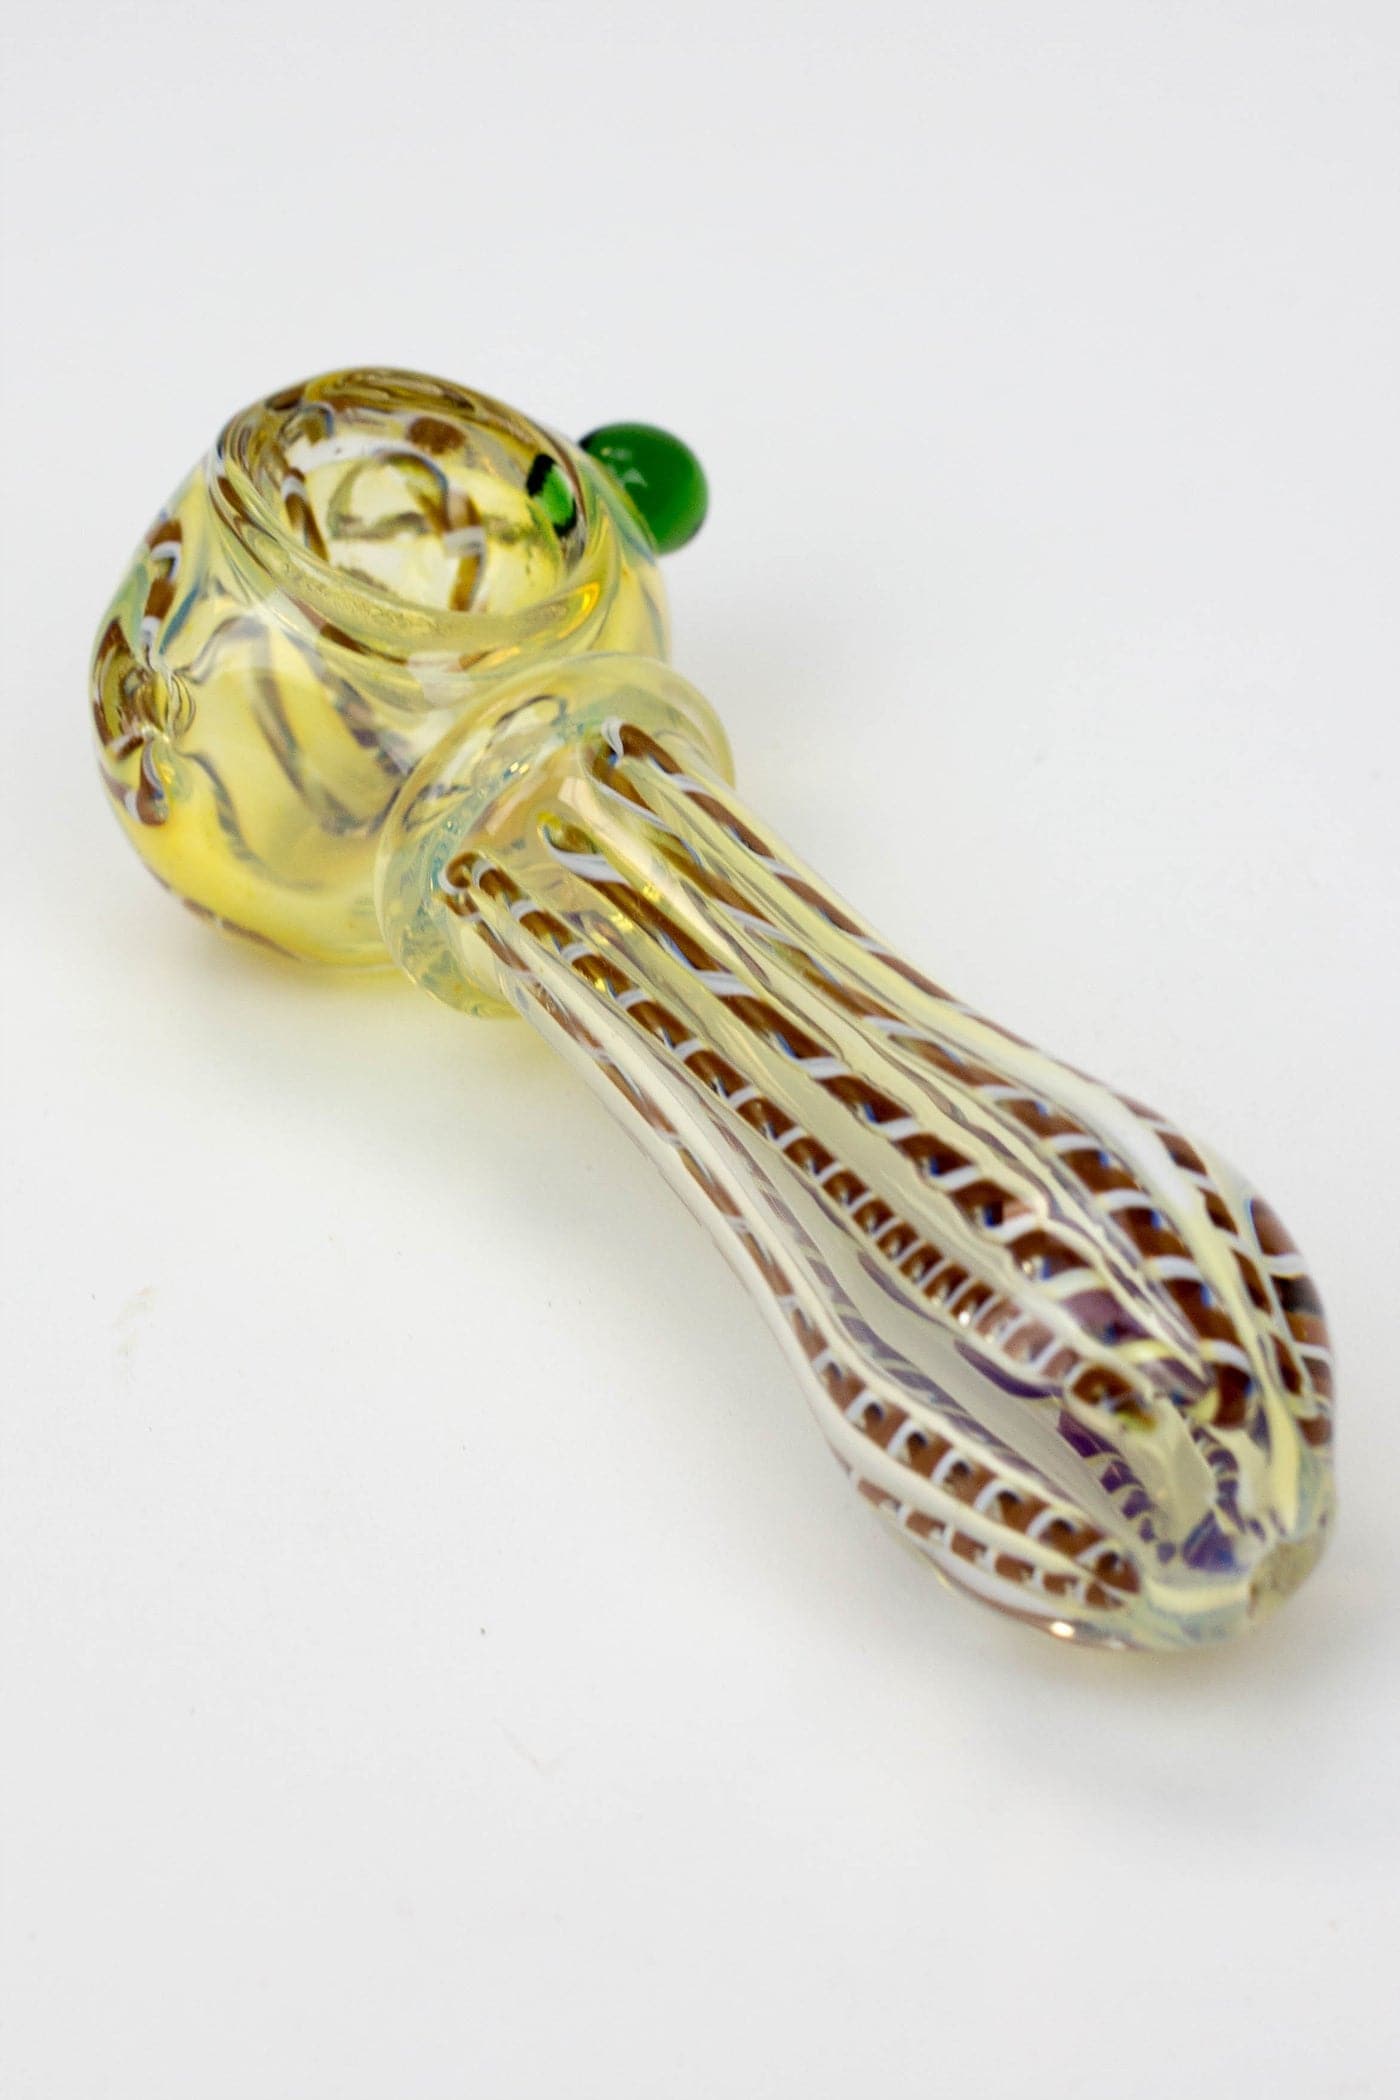 Soft glass hand pipe 4.5"_2